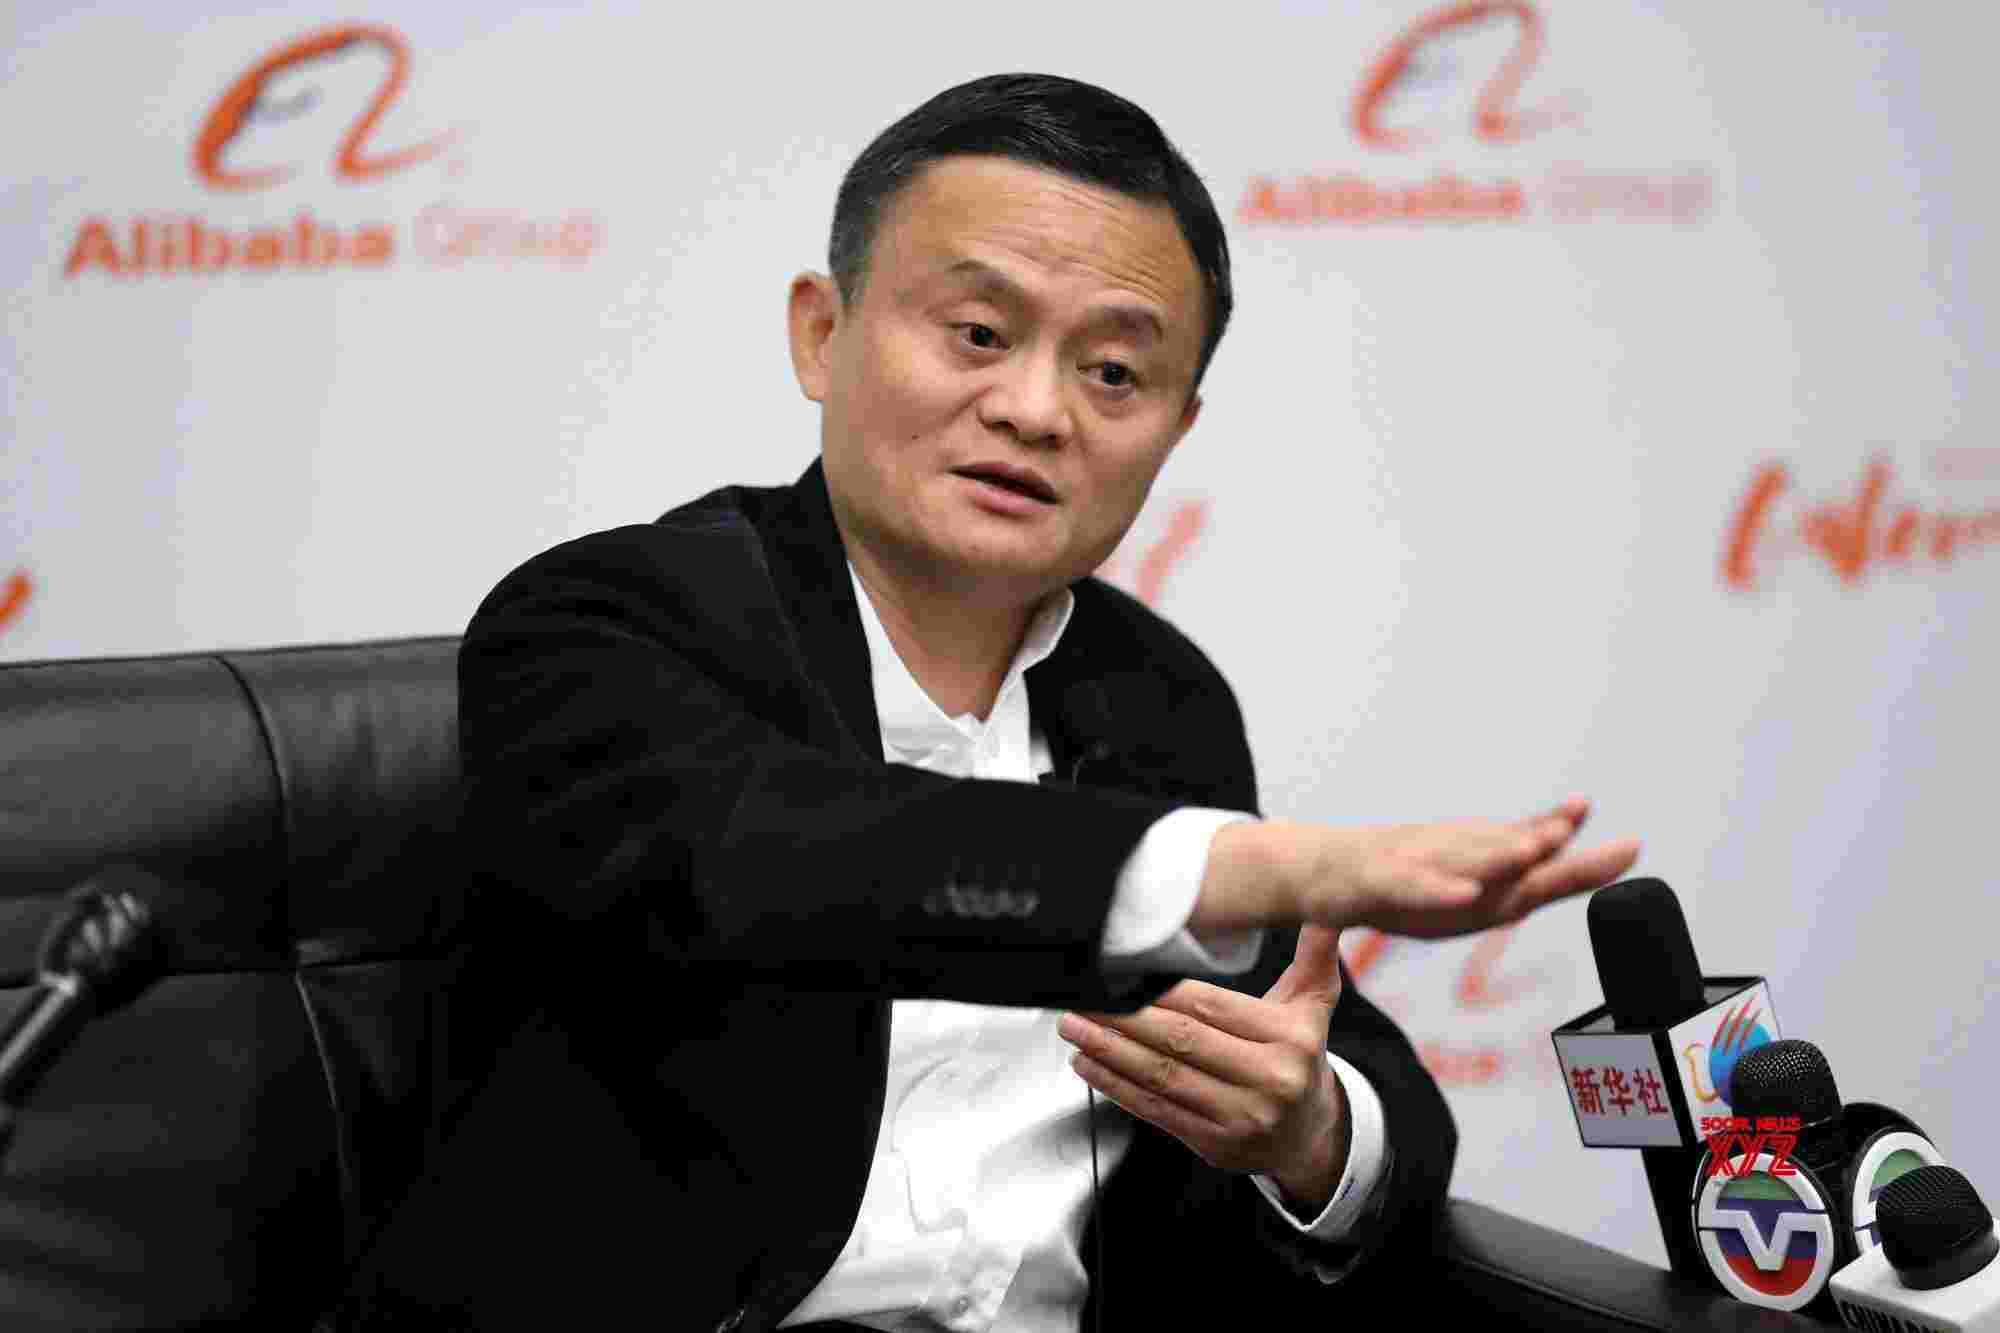 Alibaba generates whooping $31 billion in a 24-hour sale event